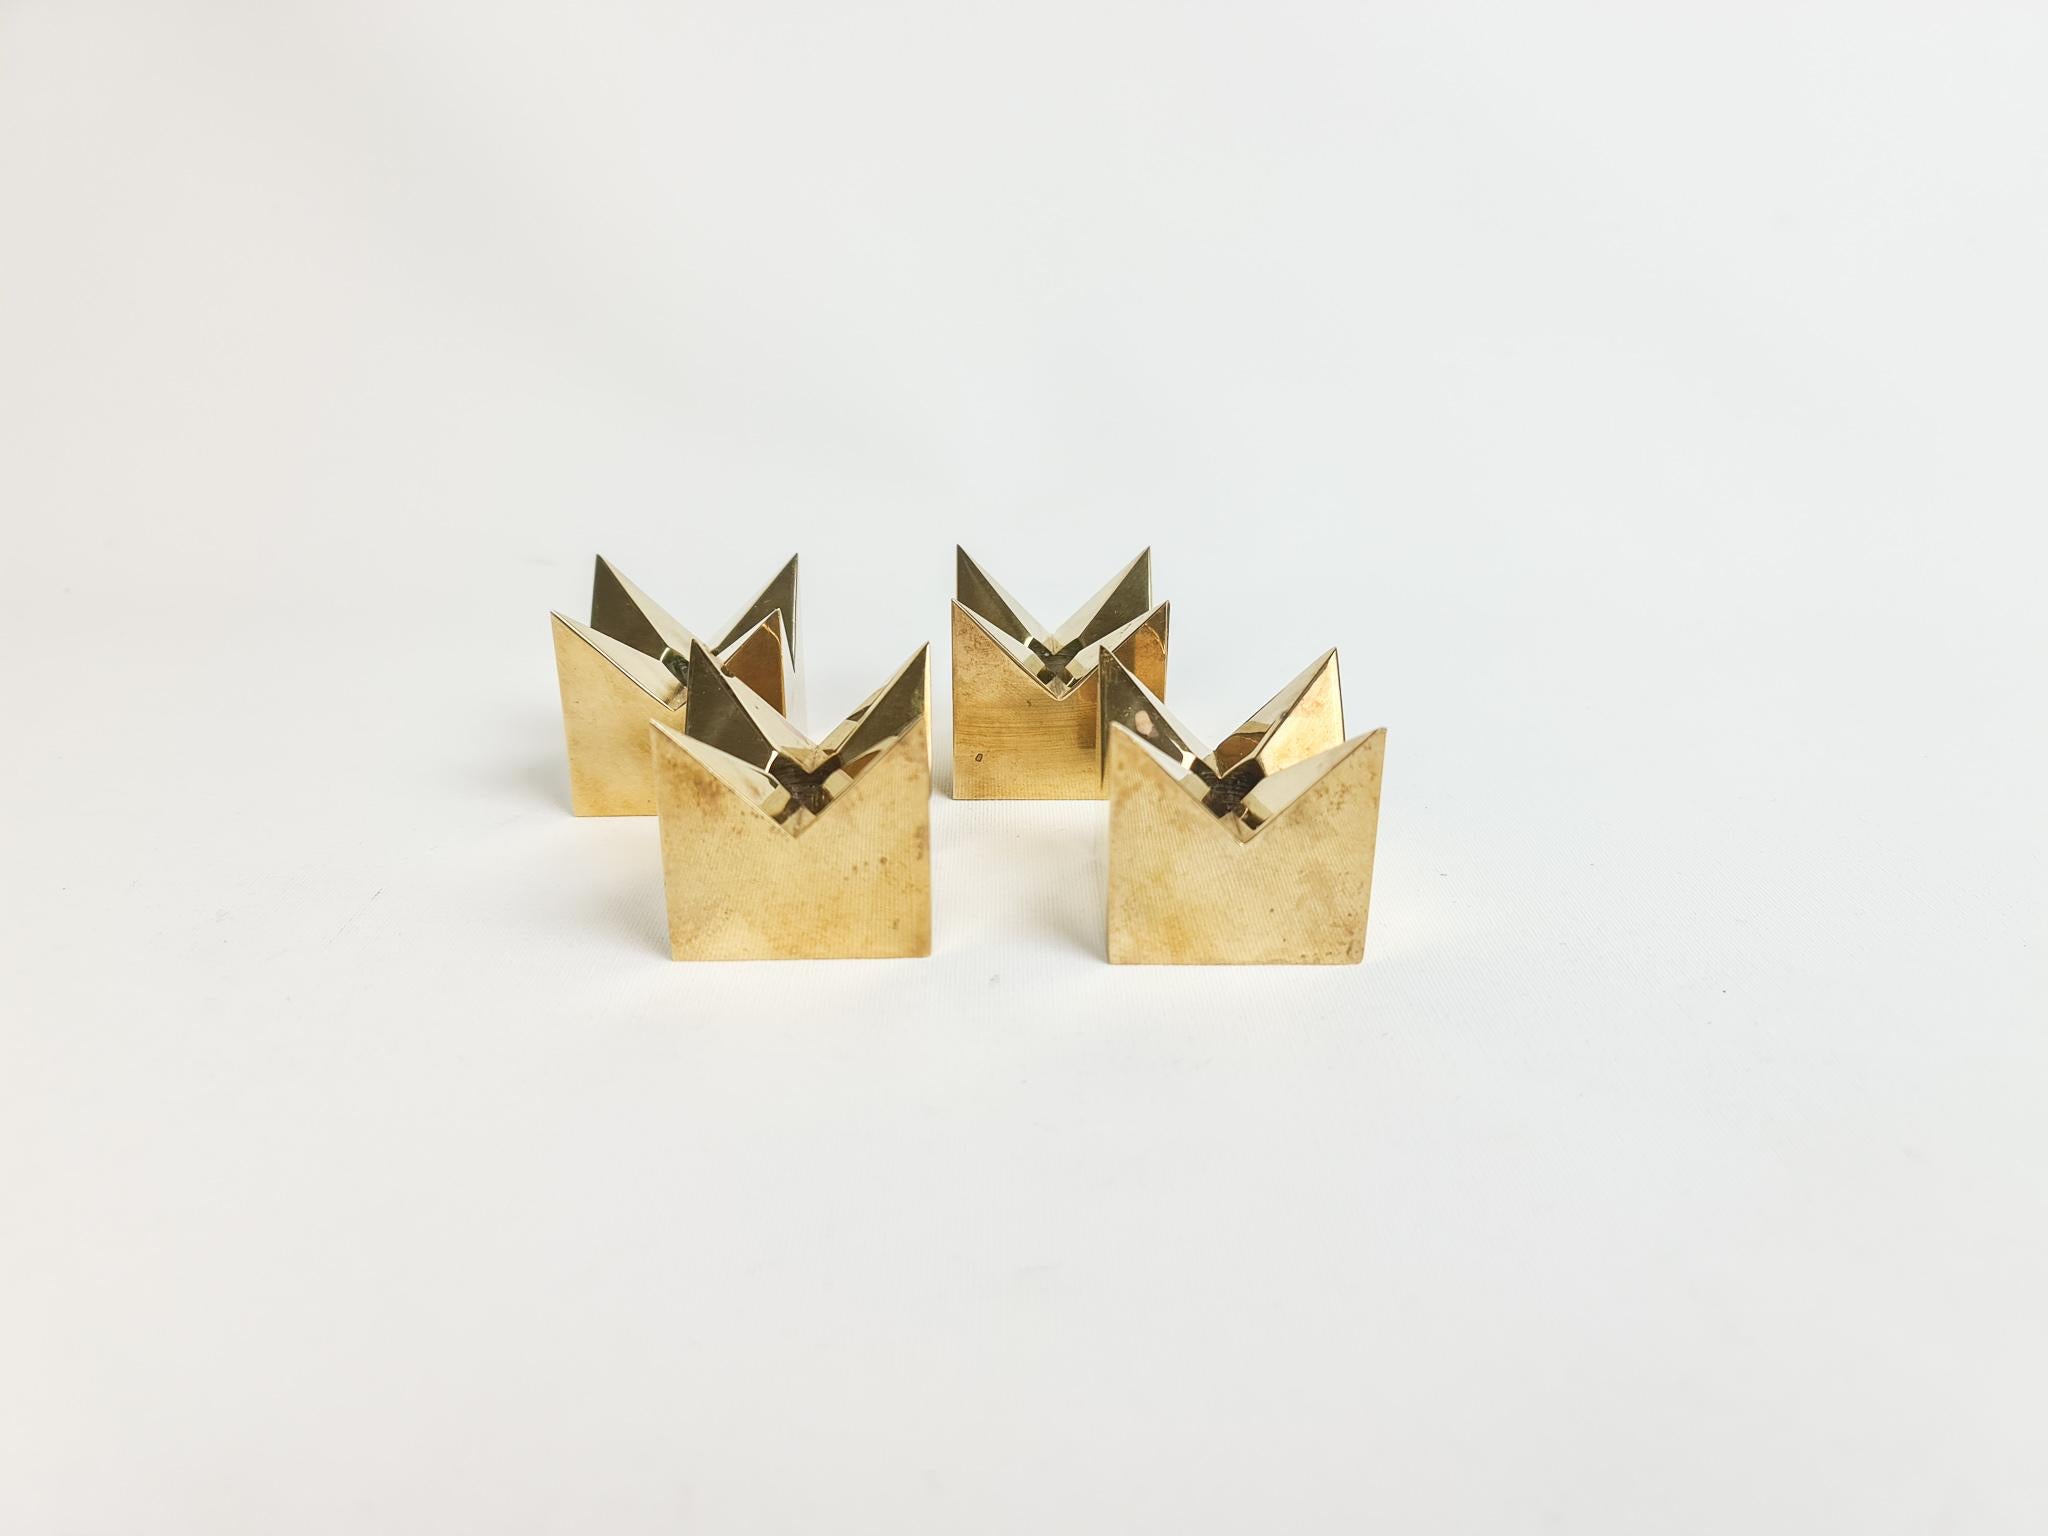 Wonderful sculptured brass candleholders made out of brass. These ones were manufactured in Sweden at Skultuna and designed by Pierre Forssell.

Good vintage condition with some wear scratches


Measures: H 4 cm, D 4 cm, W 4 cm.